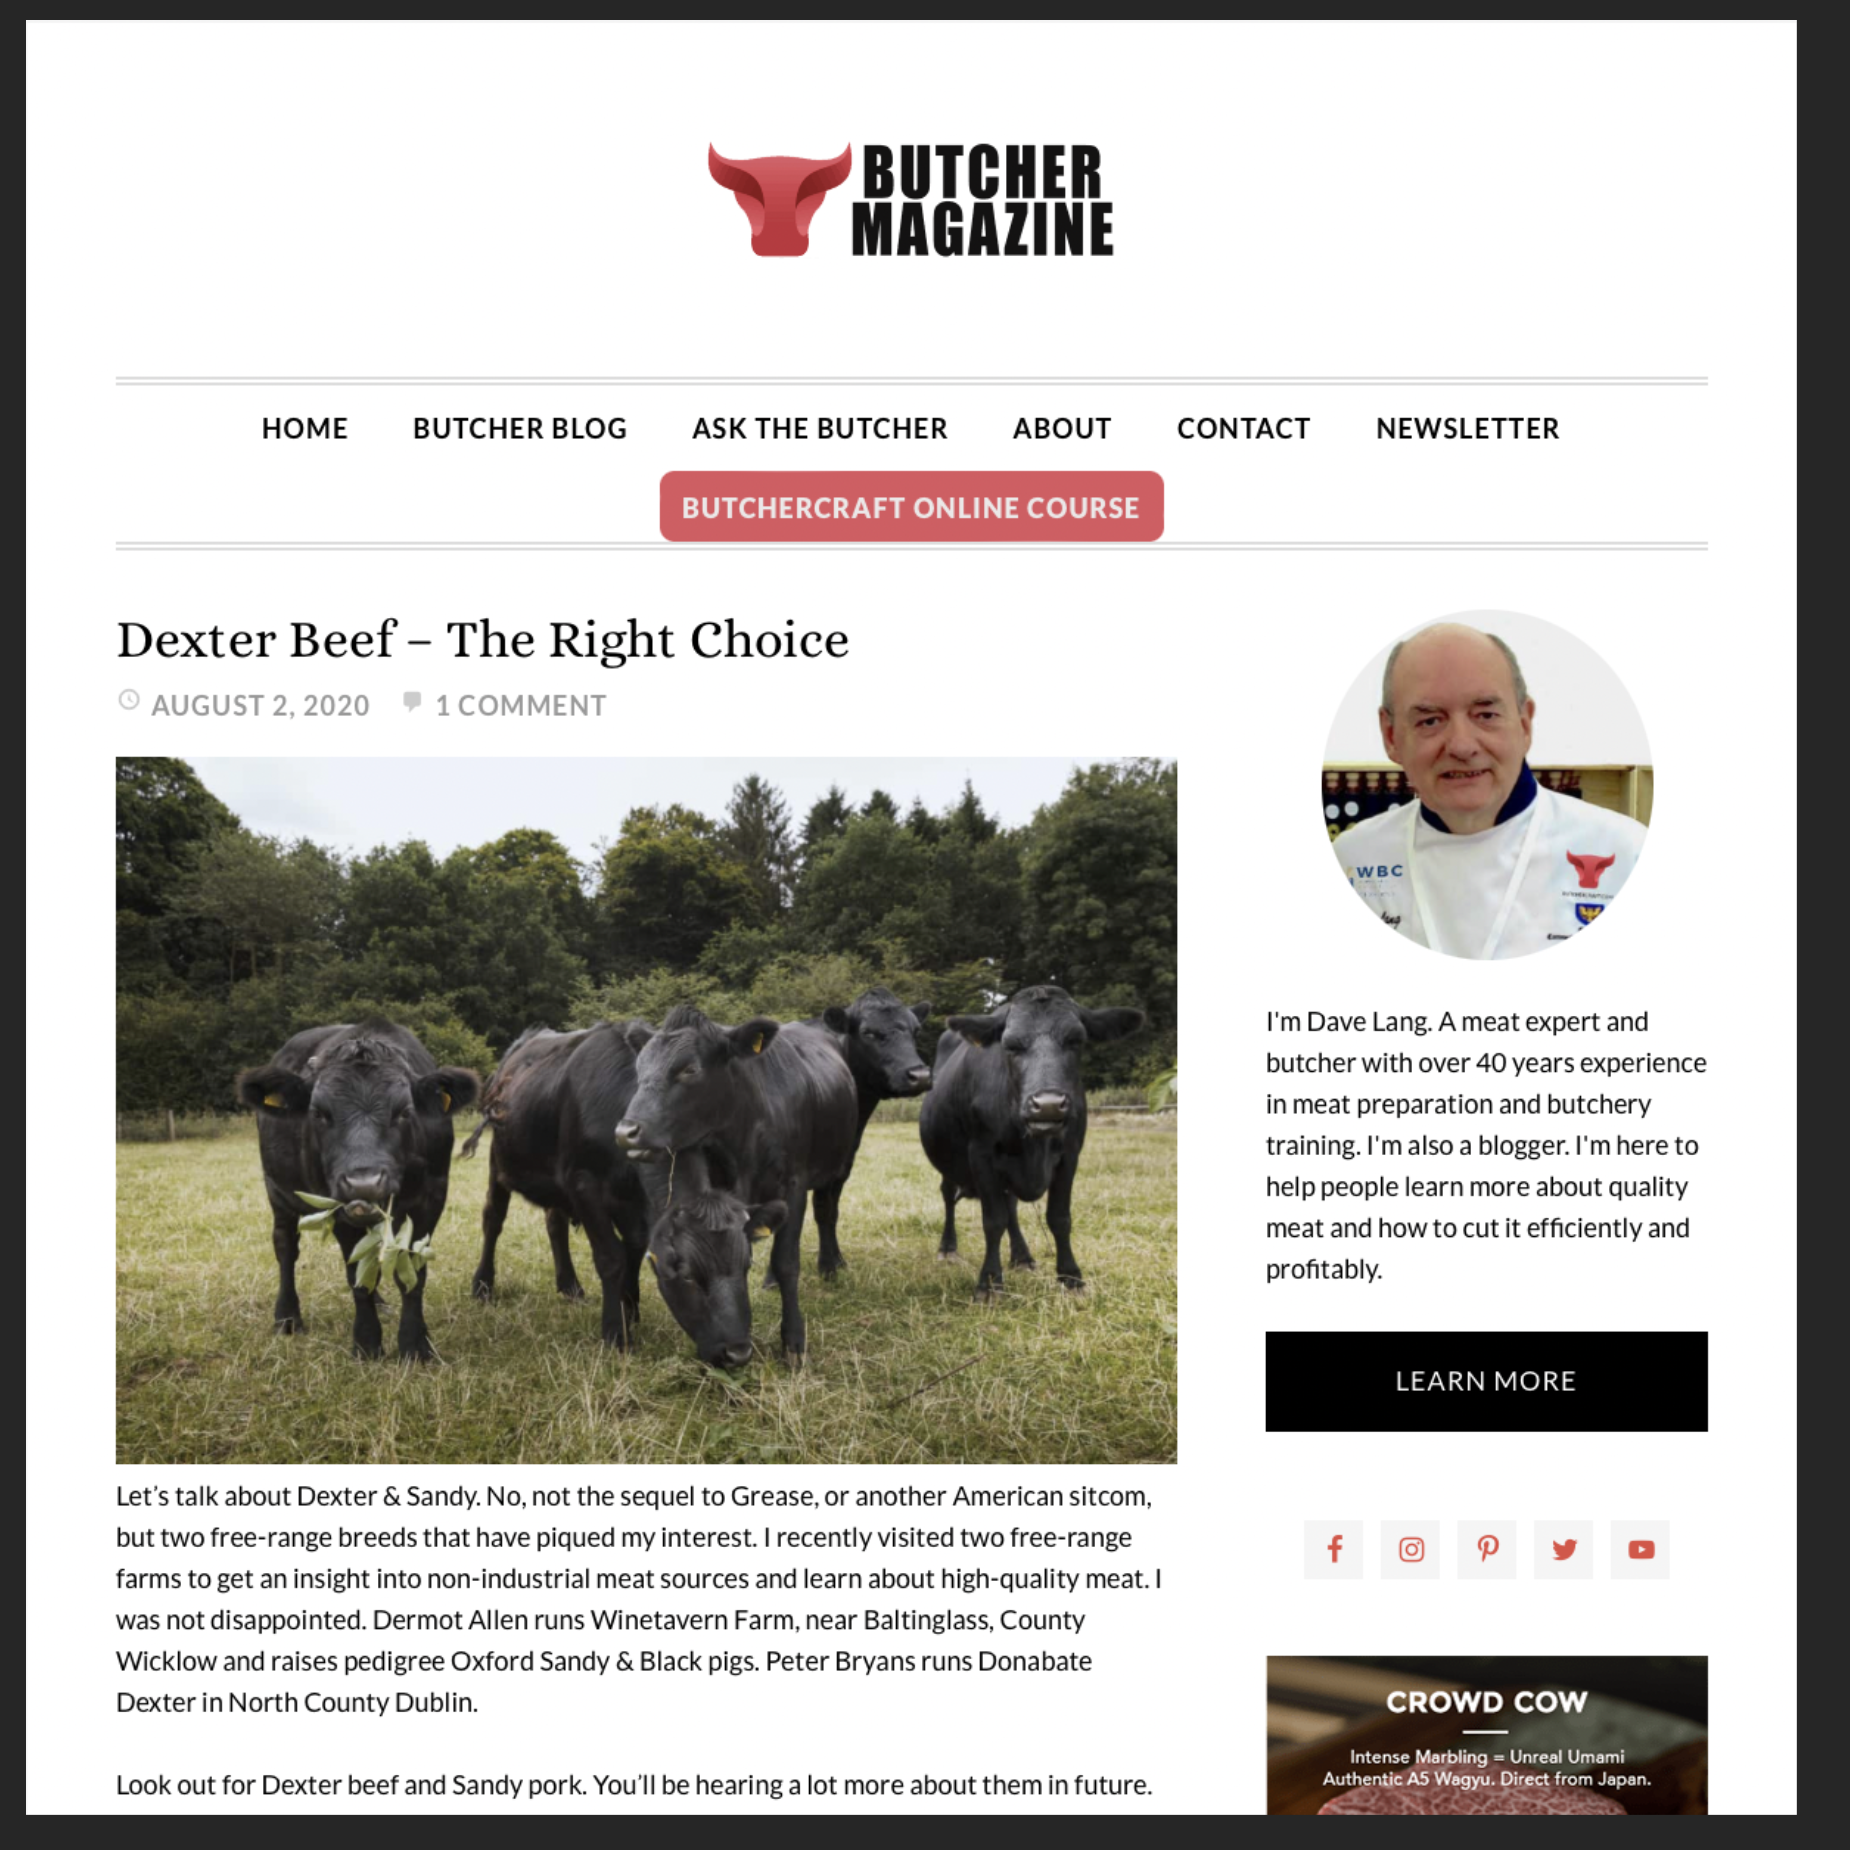 Dexter Beef – The Right Choice, Butcher Magazine